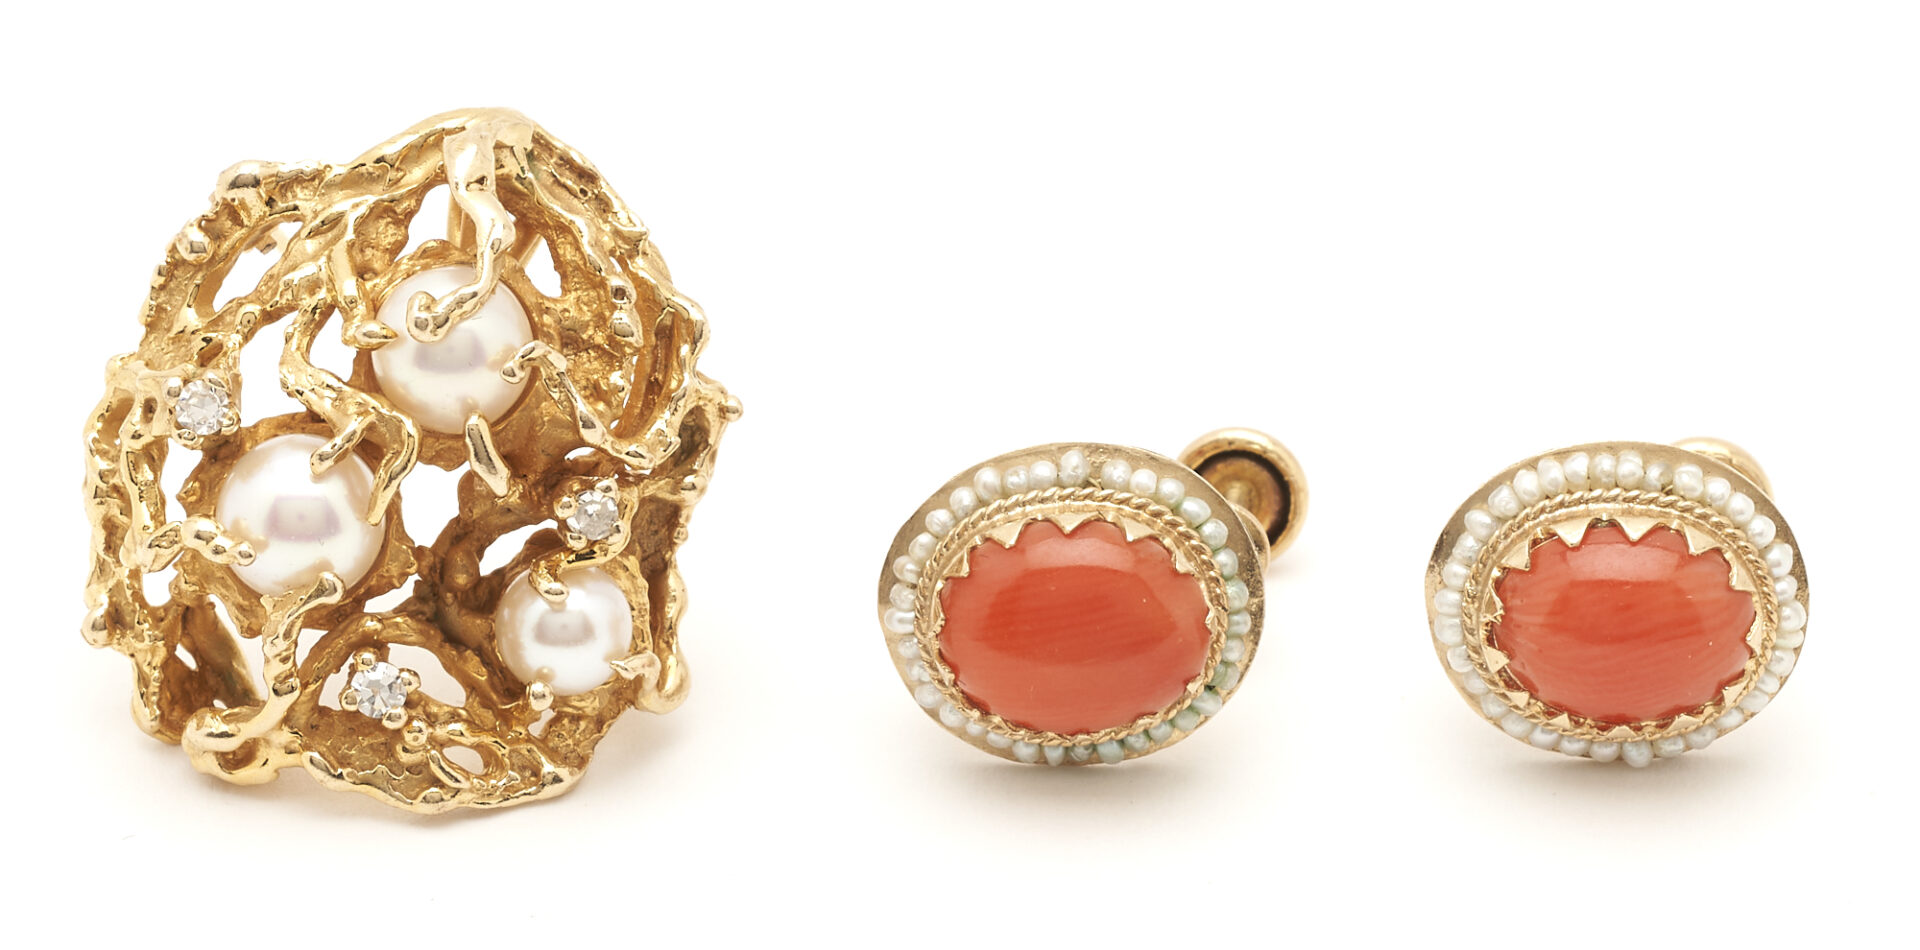 Lot 433: Pearl and Diamond Nugget Brooch plus Red Coral Earrings (2 items)